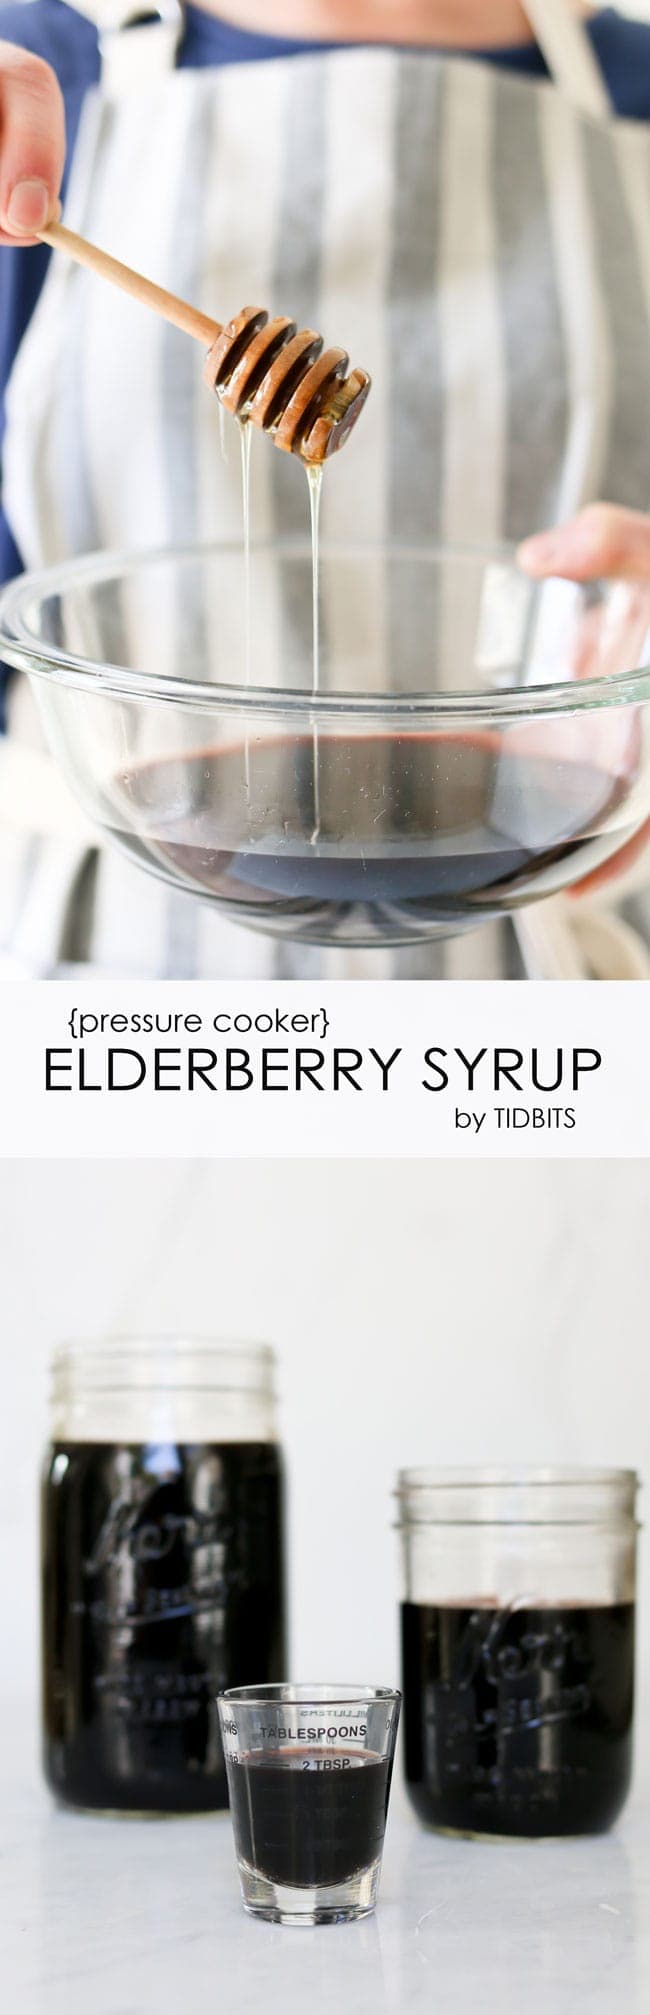 Pressure Cooker Elderberry Syrup. Give your immune system an all natural cold and flu fighting boost!